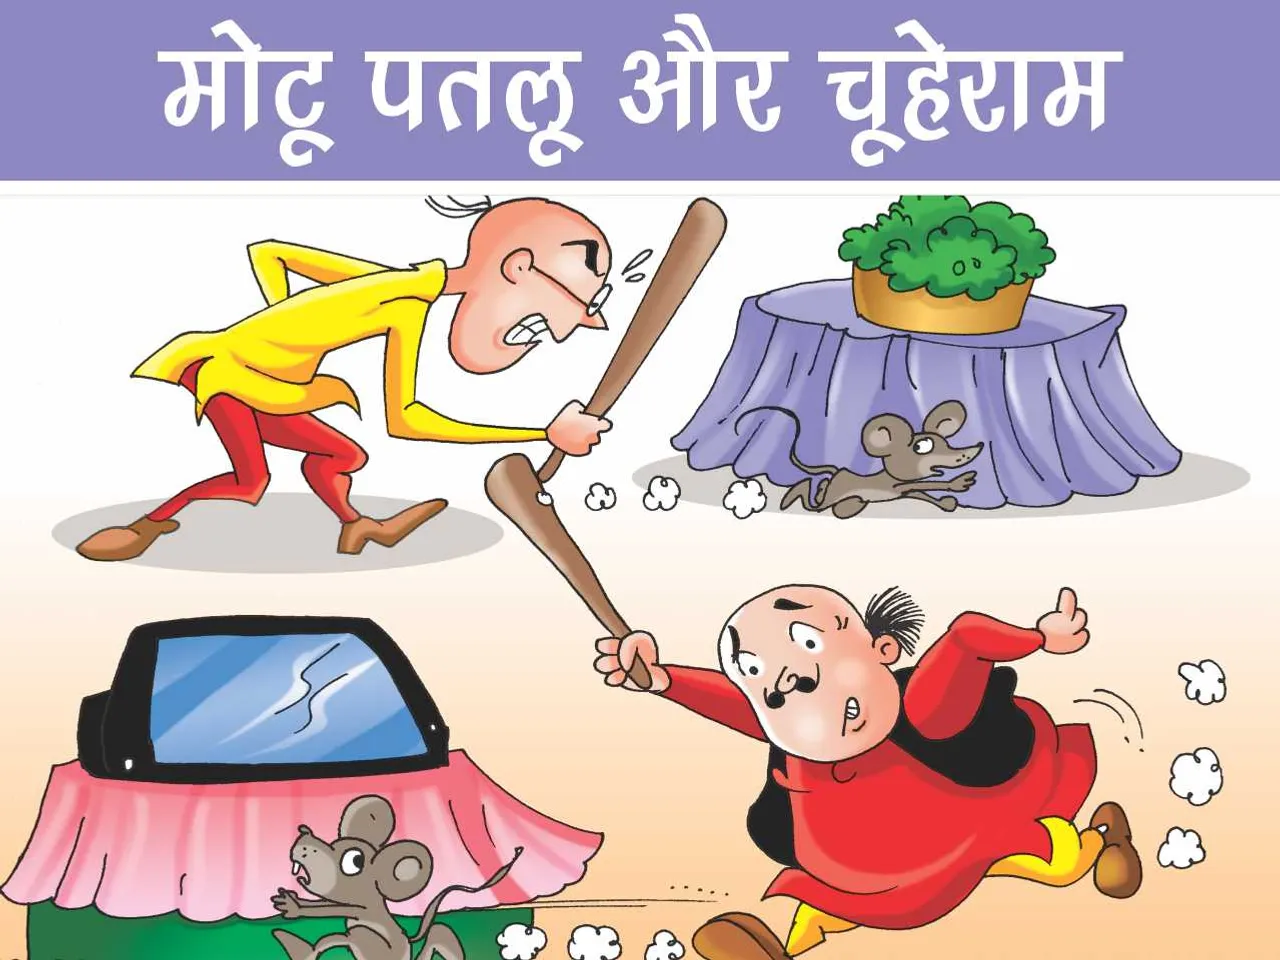 motu and patlu chasing a mouse